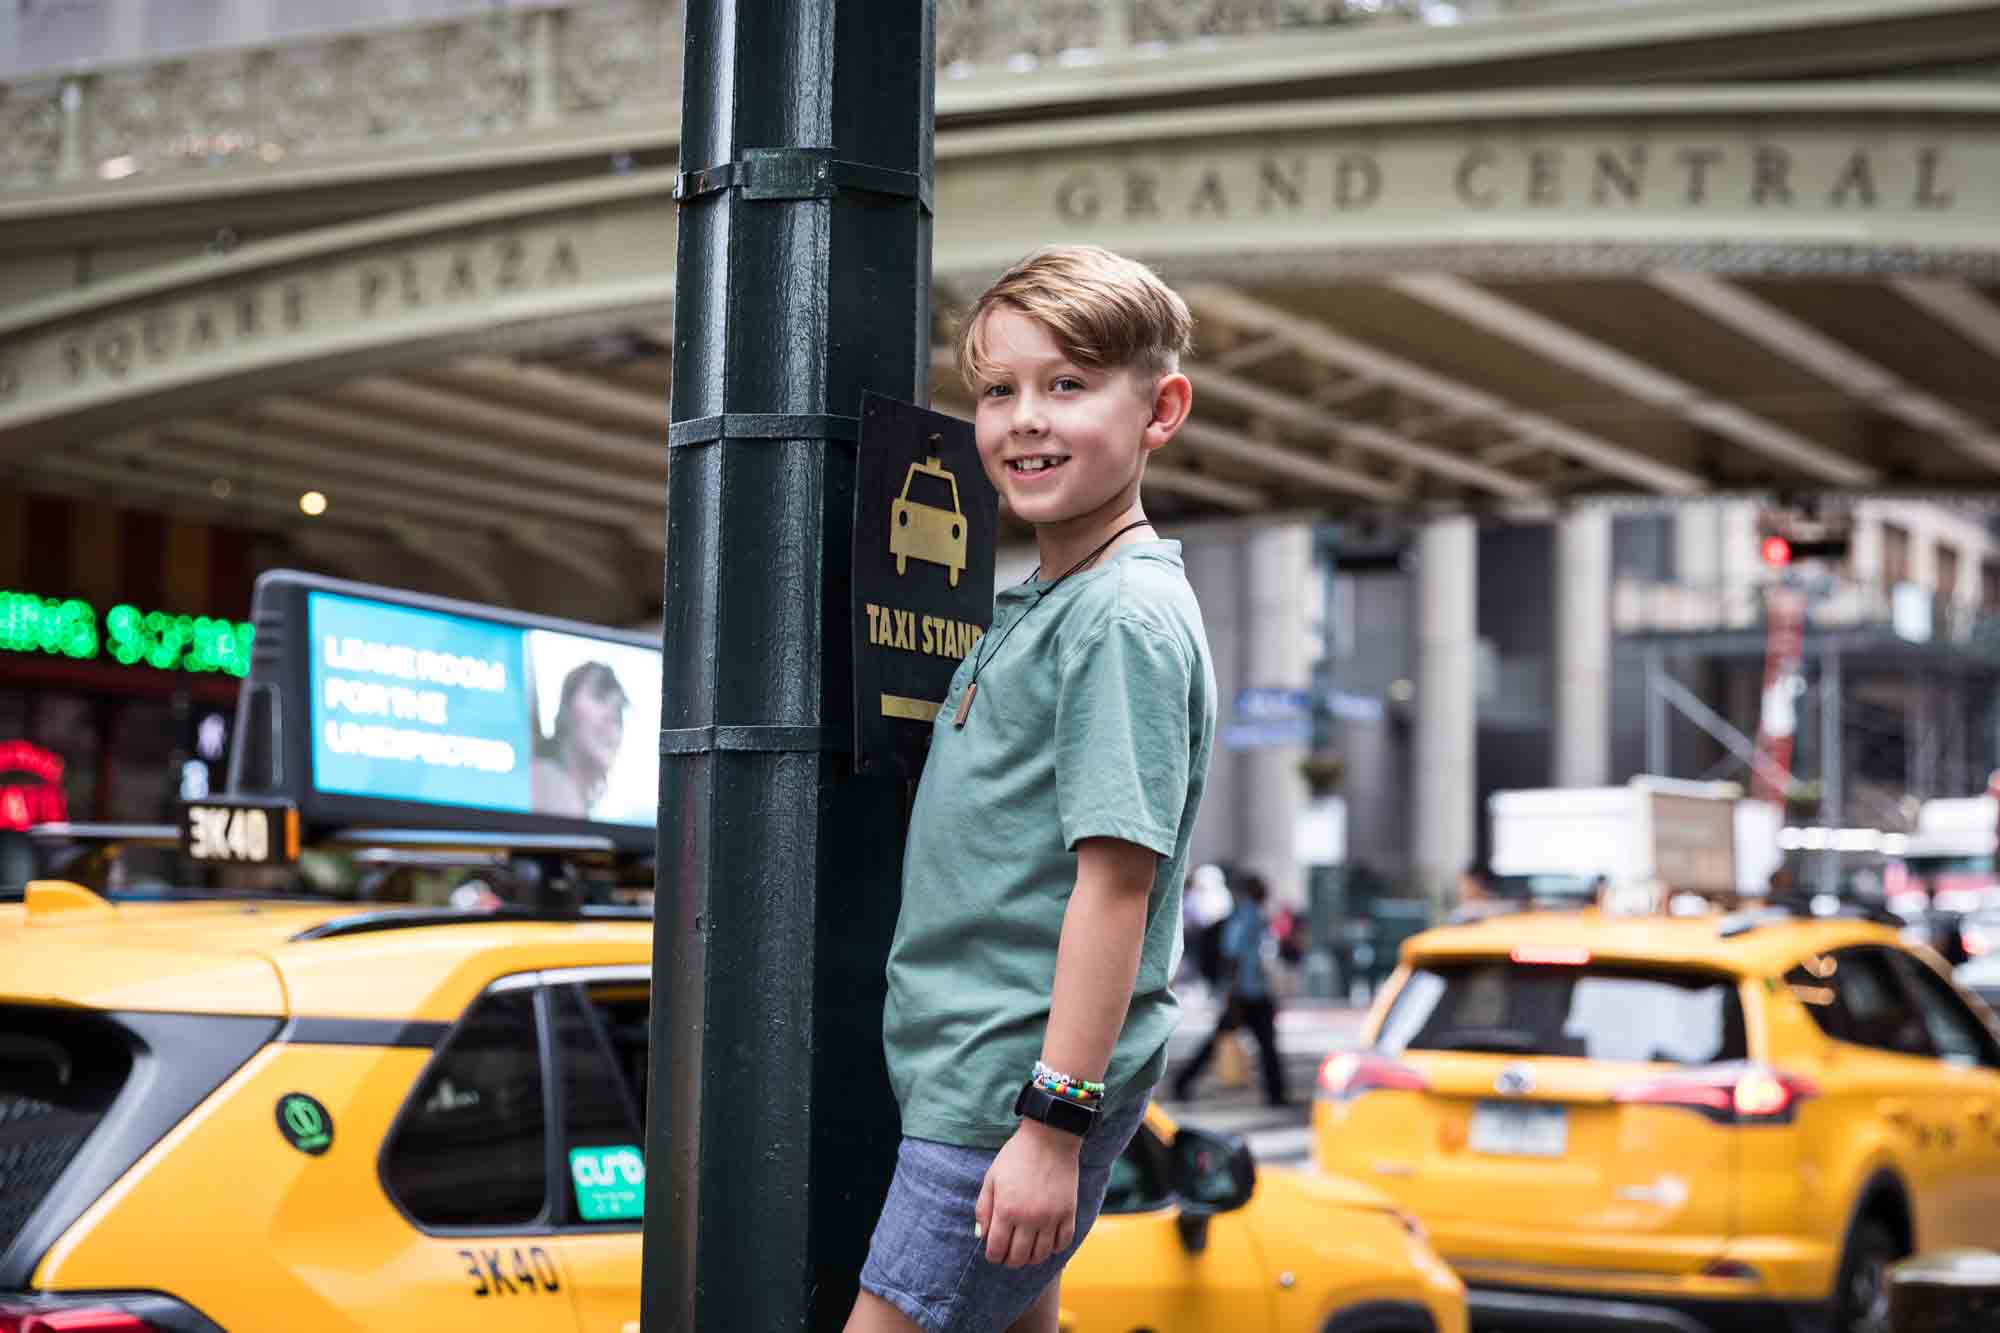 Boy standing on light pole in front of yellow taxi